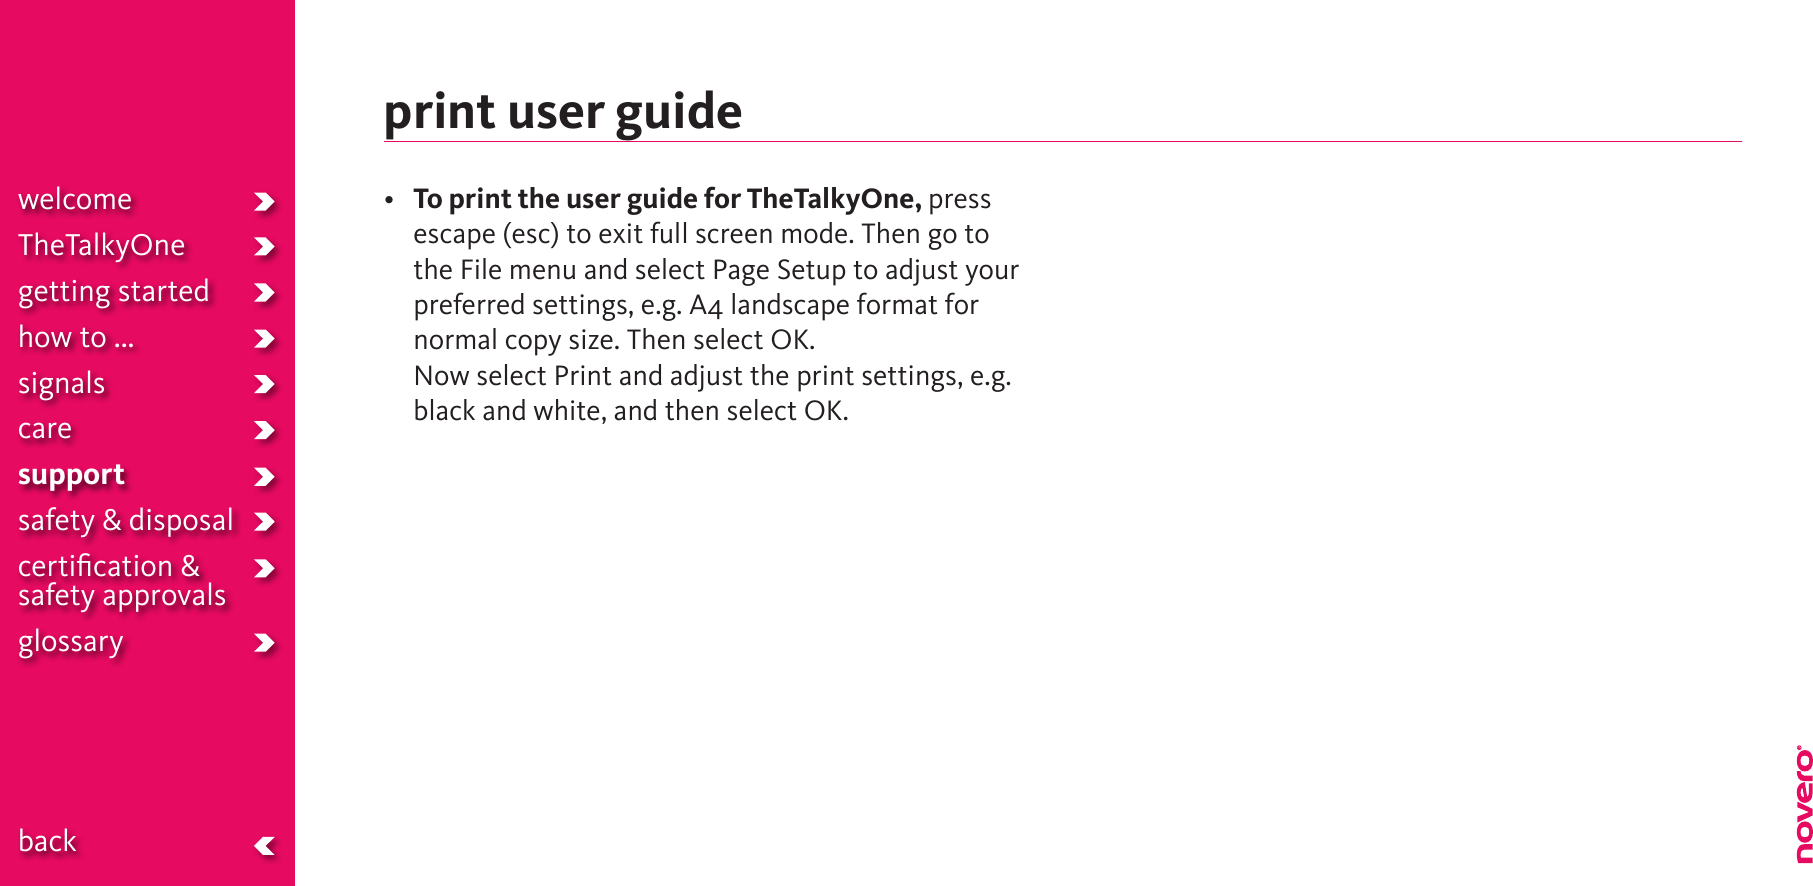 print user guide• To print the user guide for TheTalkyOne, press escape (esc) to exit full screen mode. Then go to the File menu and select Page Setup to adjust your preferred settings, e.g. A4 landscape format for normal copy size. Then select OK.  Now select Print and adjust the print settings, e.g. black and white, and then select OK. welcomeTheTalkyOnegetting startedhow to ...signalscaresupportsafety &amp; disposalcertiﬁcation &amp;  safety approvals glossary  back